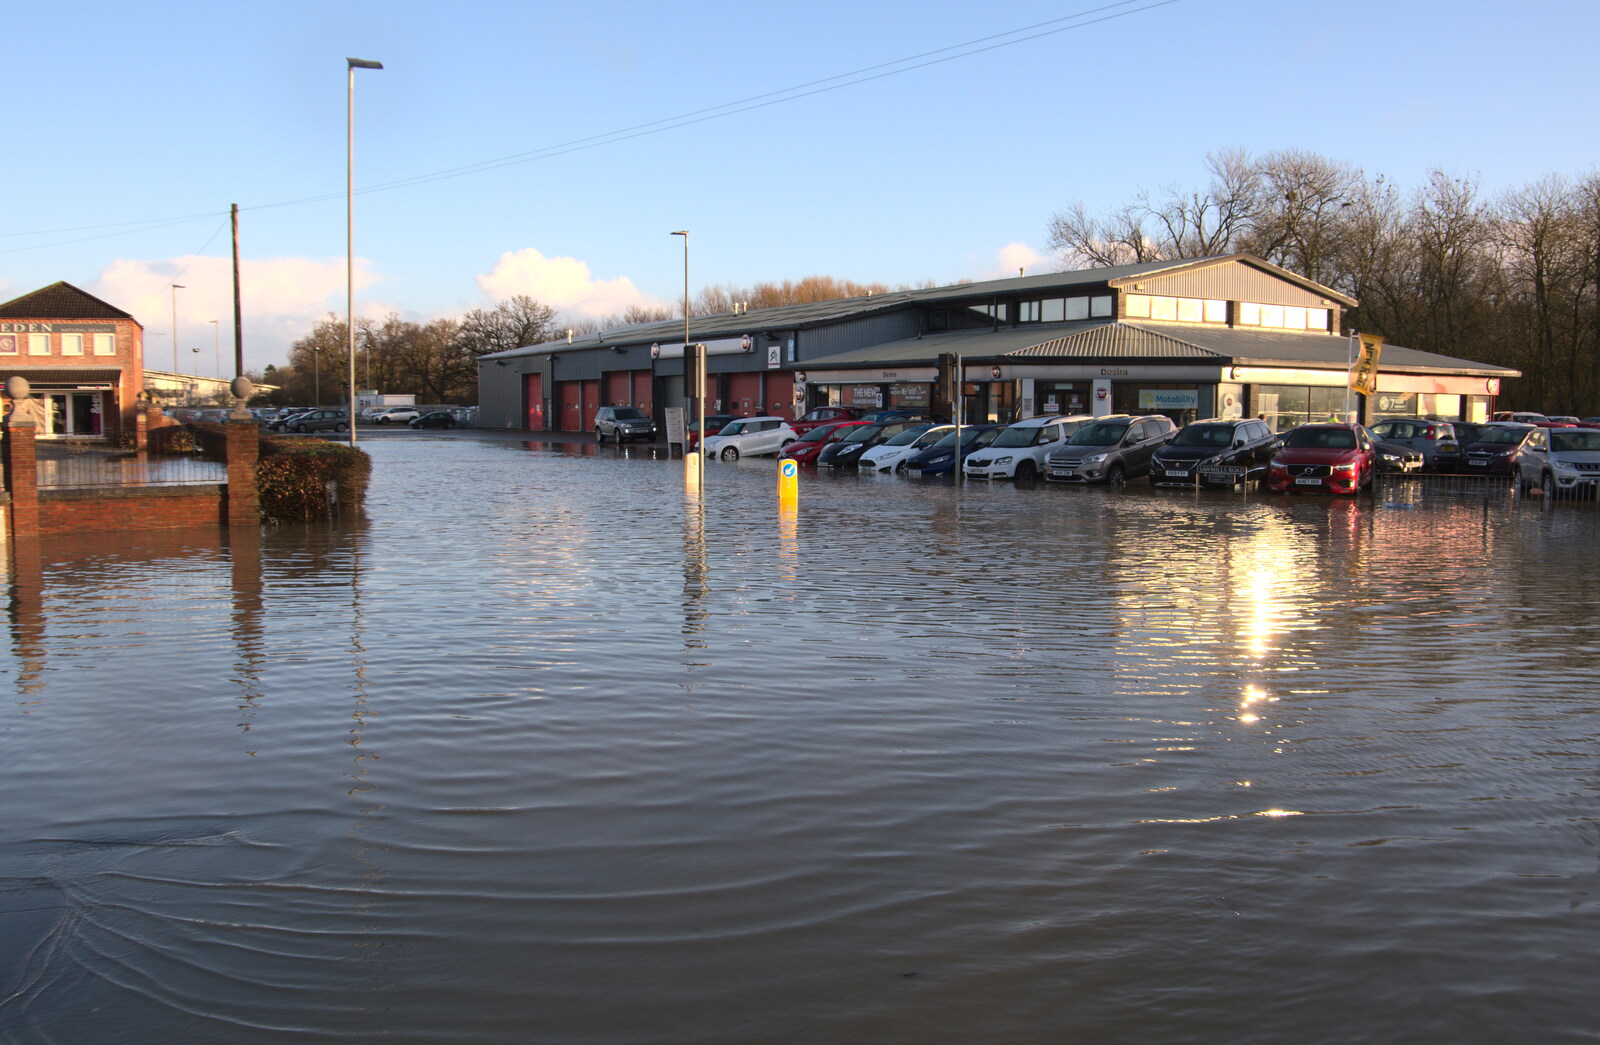 Desira Garage is cut off from The Christmas Eve Floods, Diss, Norfolk - 24th December 2020